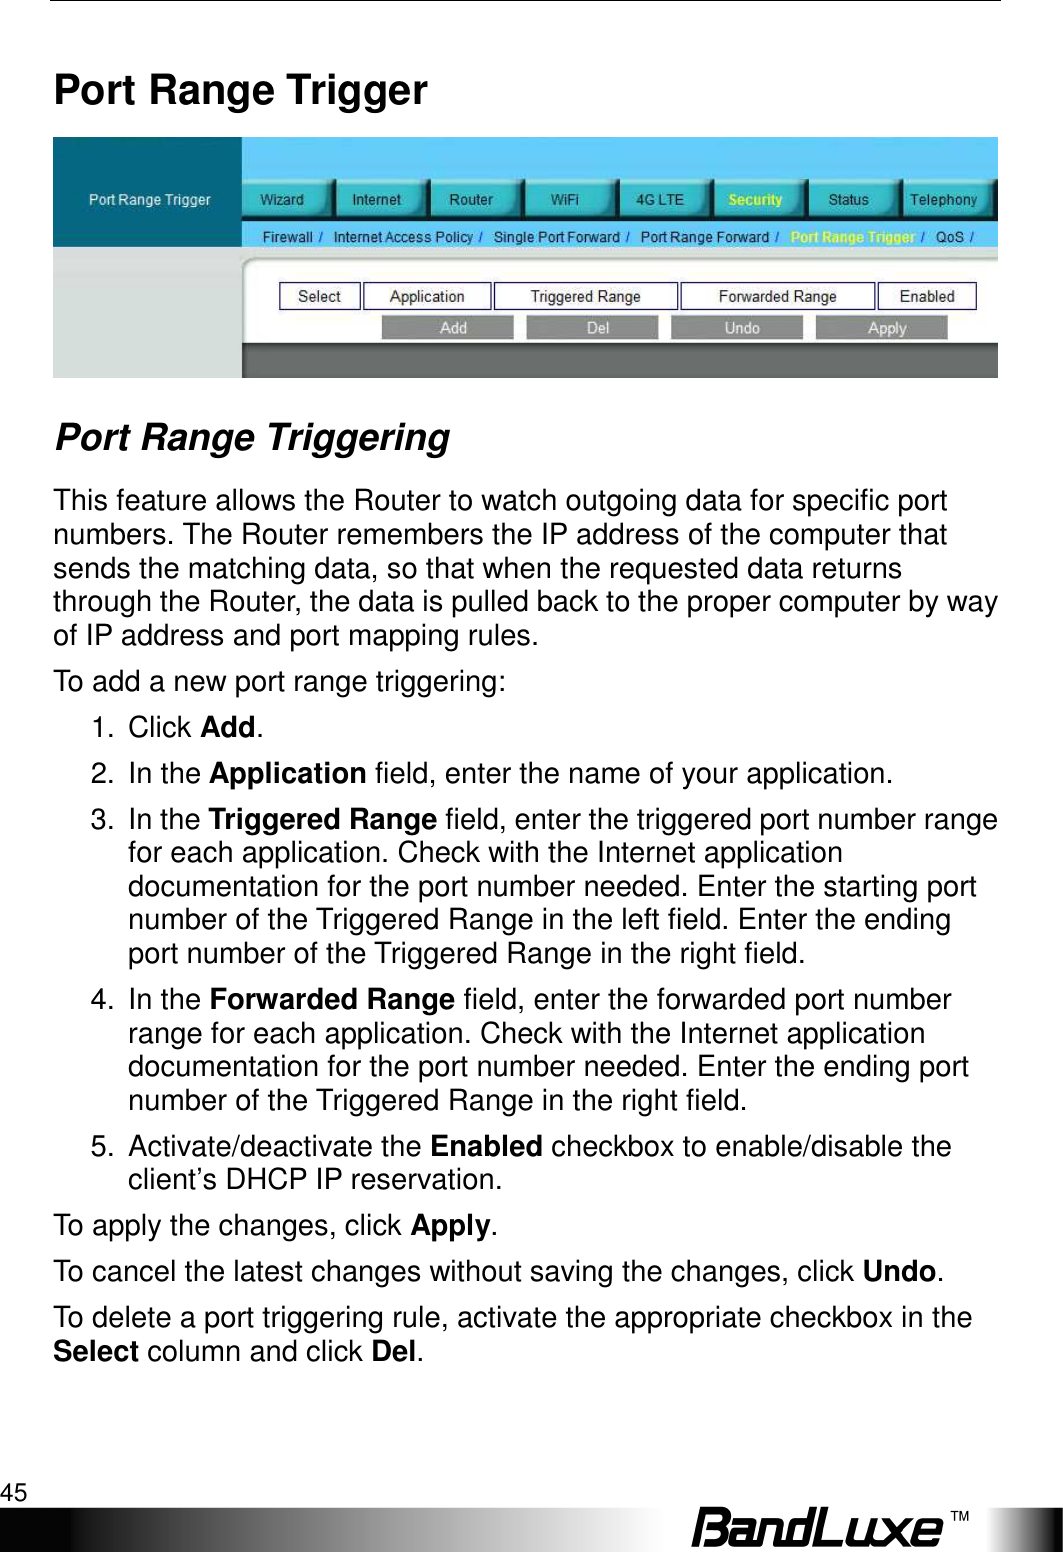   Security Setup 45 Port Range Trigger    Port Range Triggering This feature allows the Router to watch outgoing data for specific port numbers. The Router remembers the IP address of the computer that sends the matching data, so that when the requested data returns through the Router, the data is pulled back to the proper computer by way of IP address and port mapping rules.   To add a new port range triggering: 1.  Click Add. 2.  In the Application field, enter the name of your application. 3.  In the Triggered Range field, enter the triggered port number range for each application. Check with the Internet application documentation for the port number needed. Enter the starting port number of the Triggered Range in the left field. Enter the ending port number of the Triggered Range in the right field. 4.  In the Forwarded Range field, enter the forwarded port number range for each application. Check with the Internet application documentation for the port number needed. Enter the ending port number of the Triggered Range in the right field.   5.  Activate/deactivate the Enabled checkbox to enable/disable the client’s DHCP IP reservation.   To apply the changes, click Apply.   To cancel the latest changes without saving the changes, click Undo. To delete a port triggering rule, activate the appropriate checkbox in the Select column and click Del. 